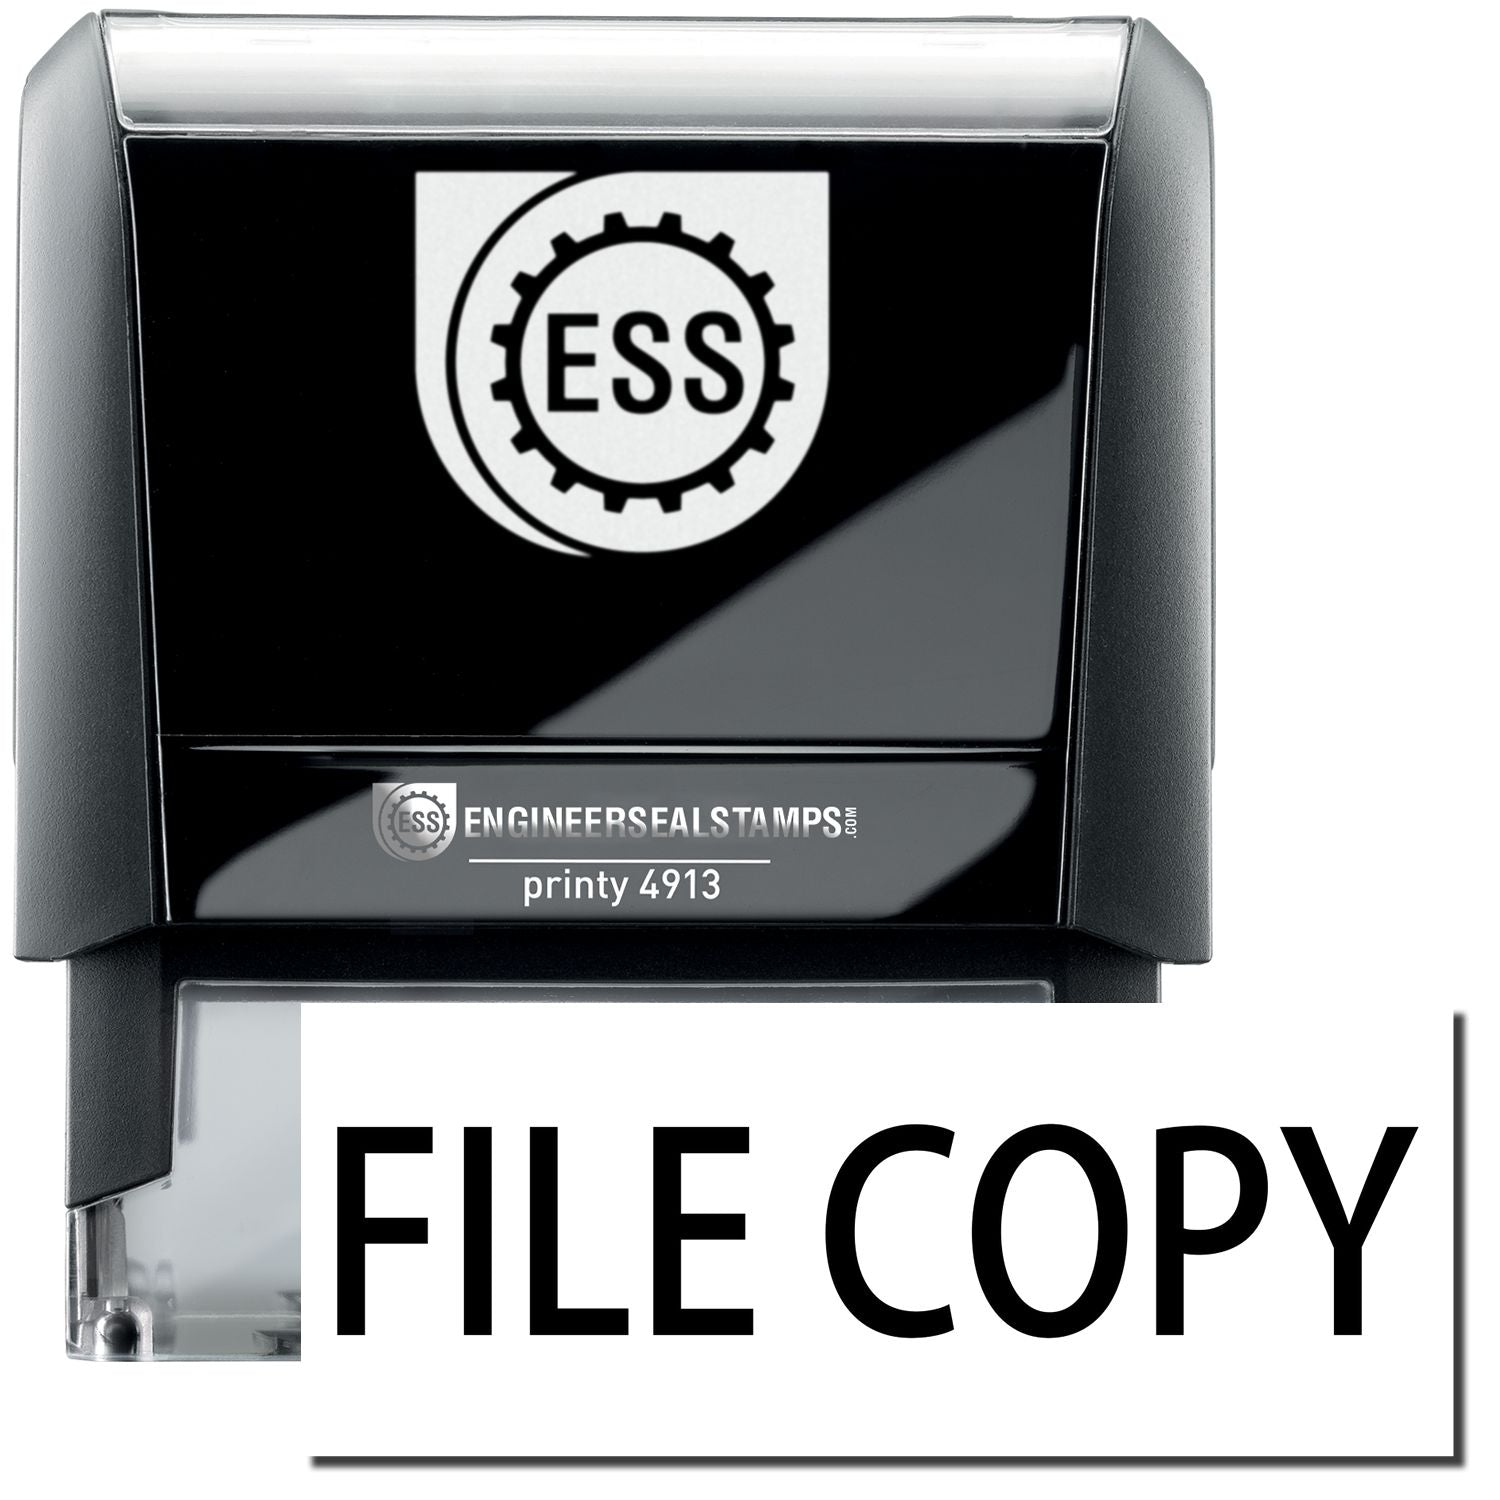 A self-inking stamp with a stamped image showing how the text "FILE COPY" in a large bold font is displayed by it.